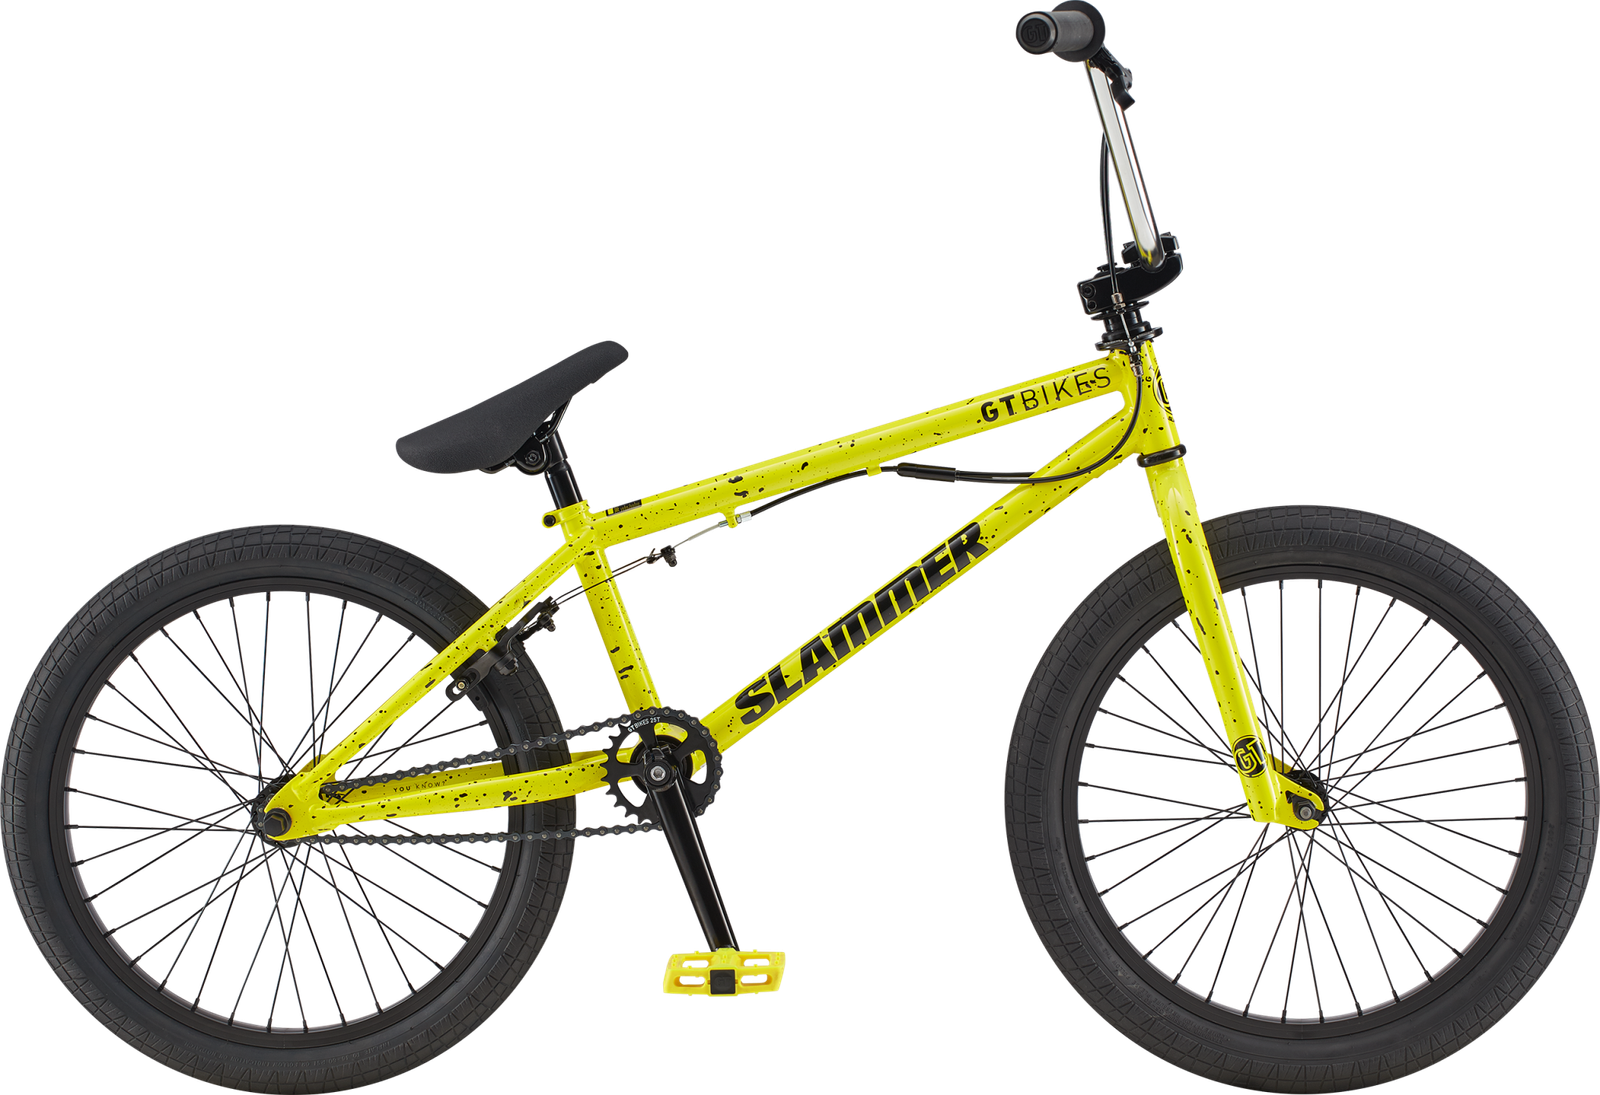 BRAND NEW GT PERFORMER AND SLAMMER BMX BIKES NOW IN STOCK!! Melonbike